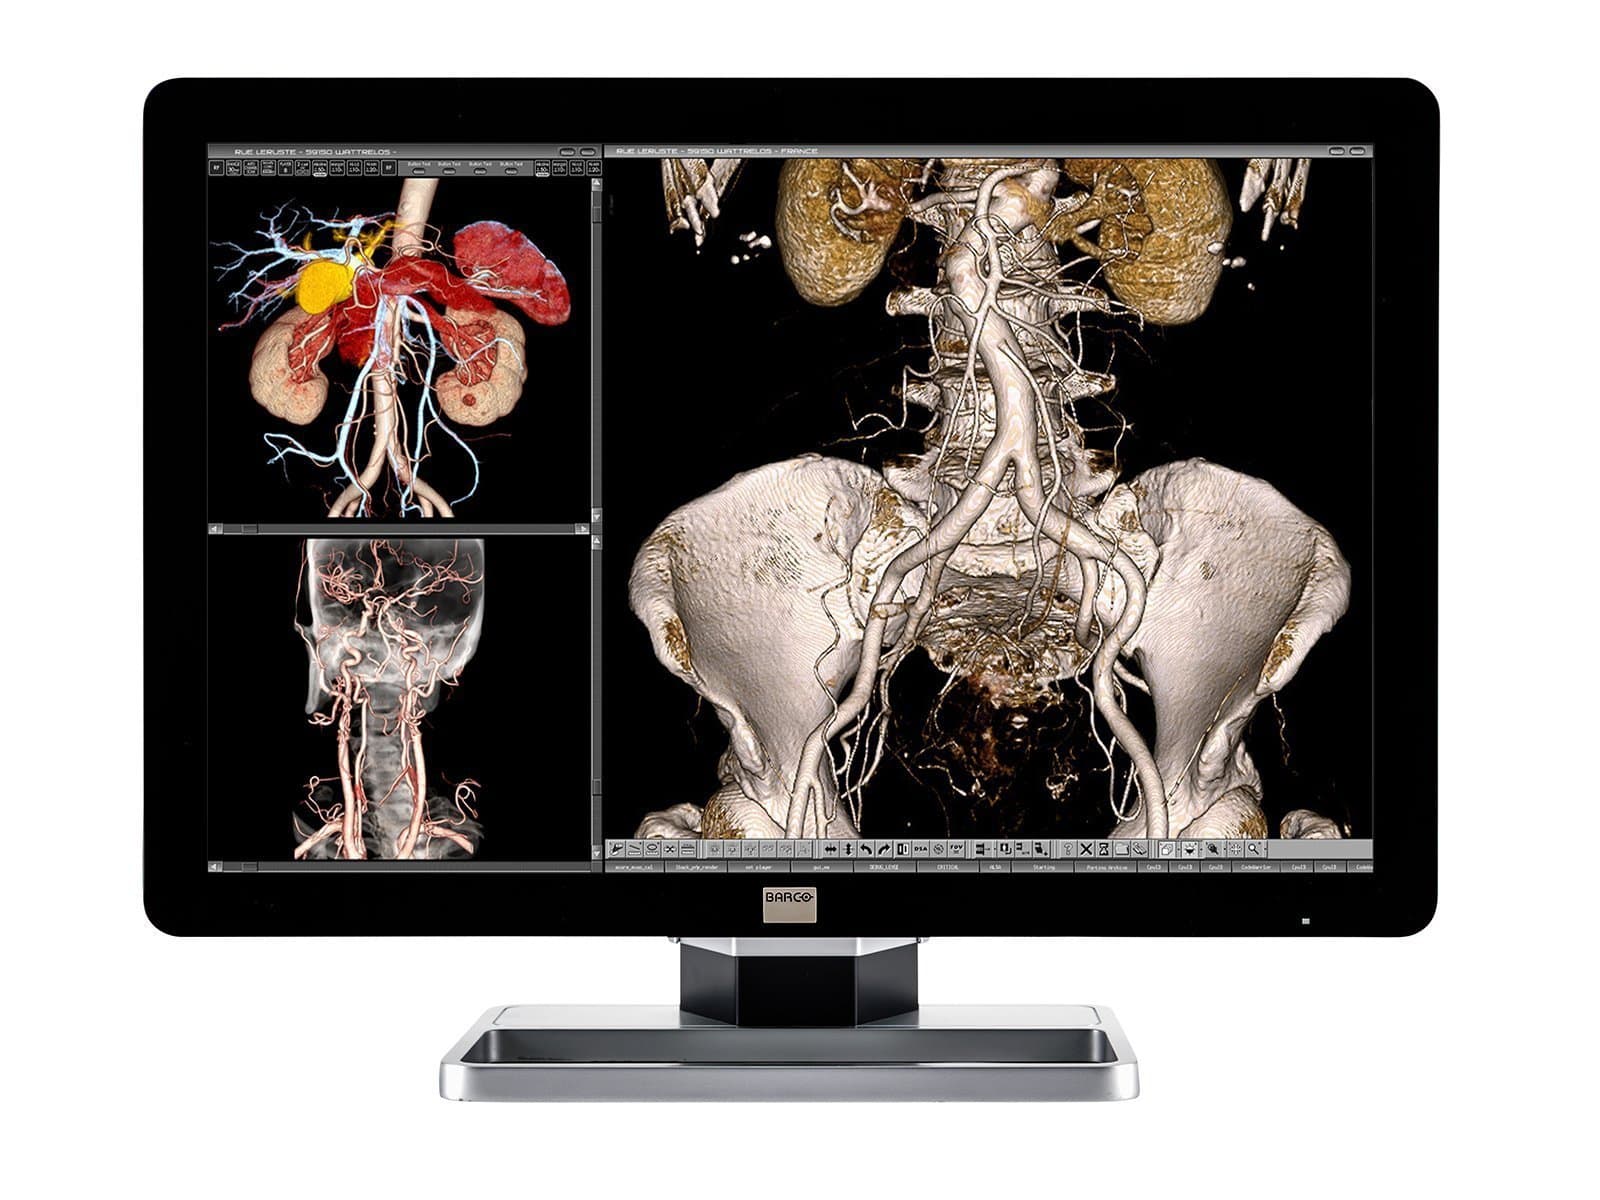 Complete PACS General Radiology Station | Barco 6MP Color LED Display | Dell Workstation | Dictation Mic | Worklist Monitor (6230Z6R) Monitors.com 